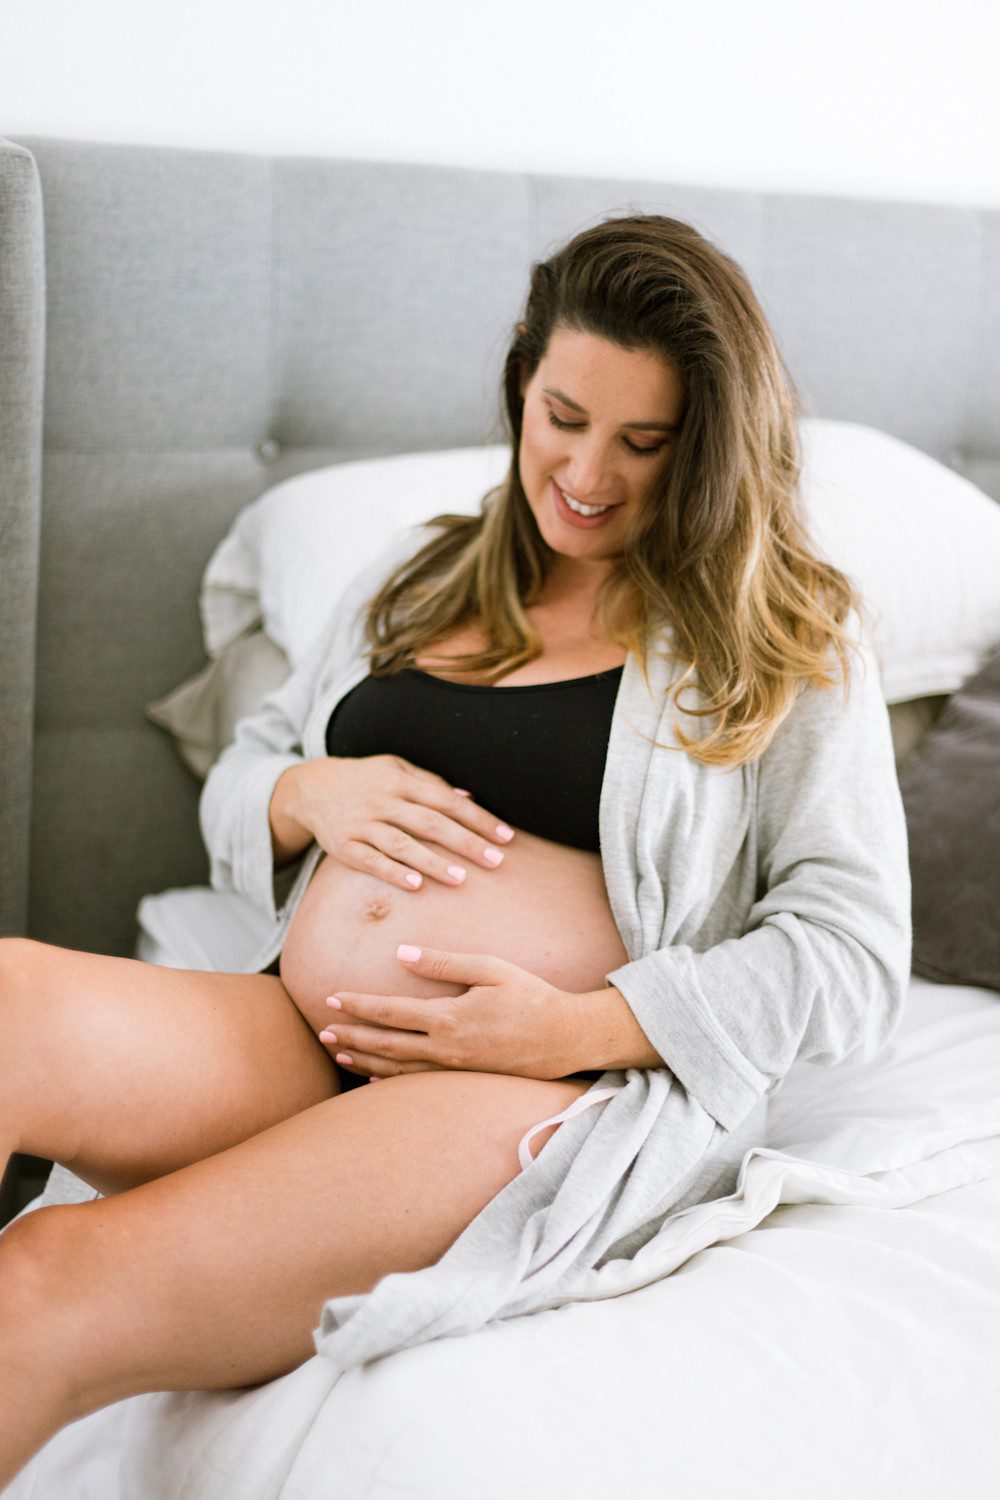 Top 10 Essential Oils While Pregnant That are Completely Safe